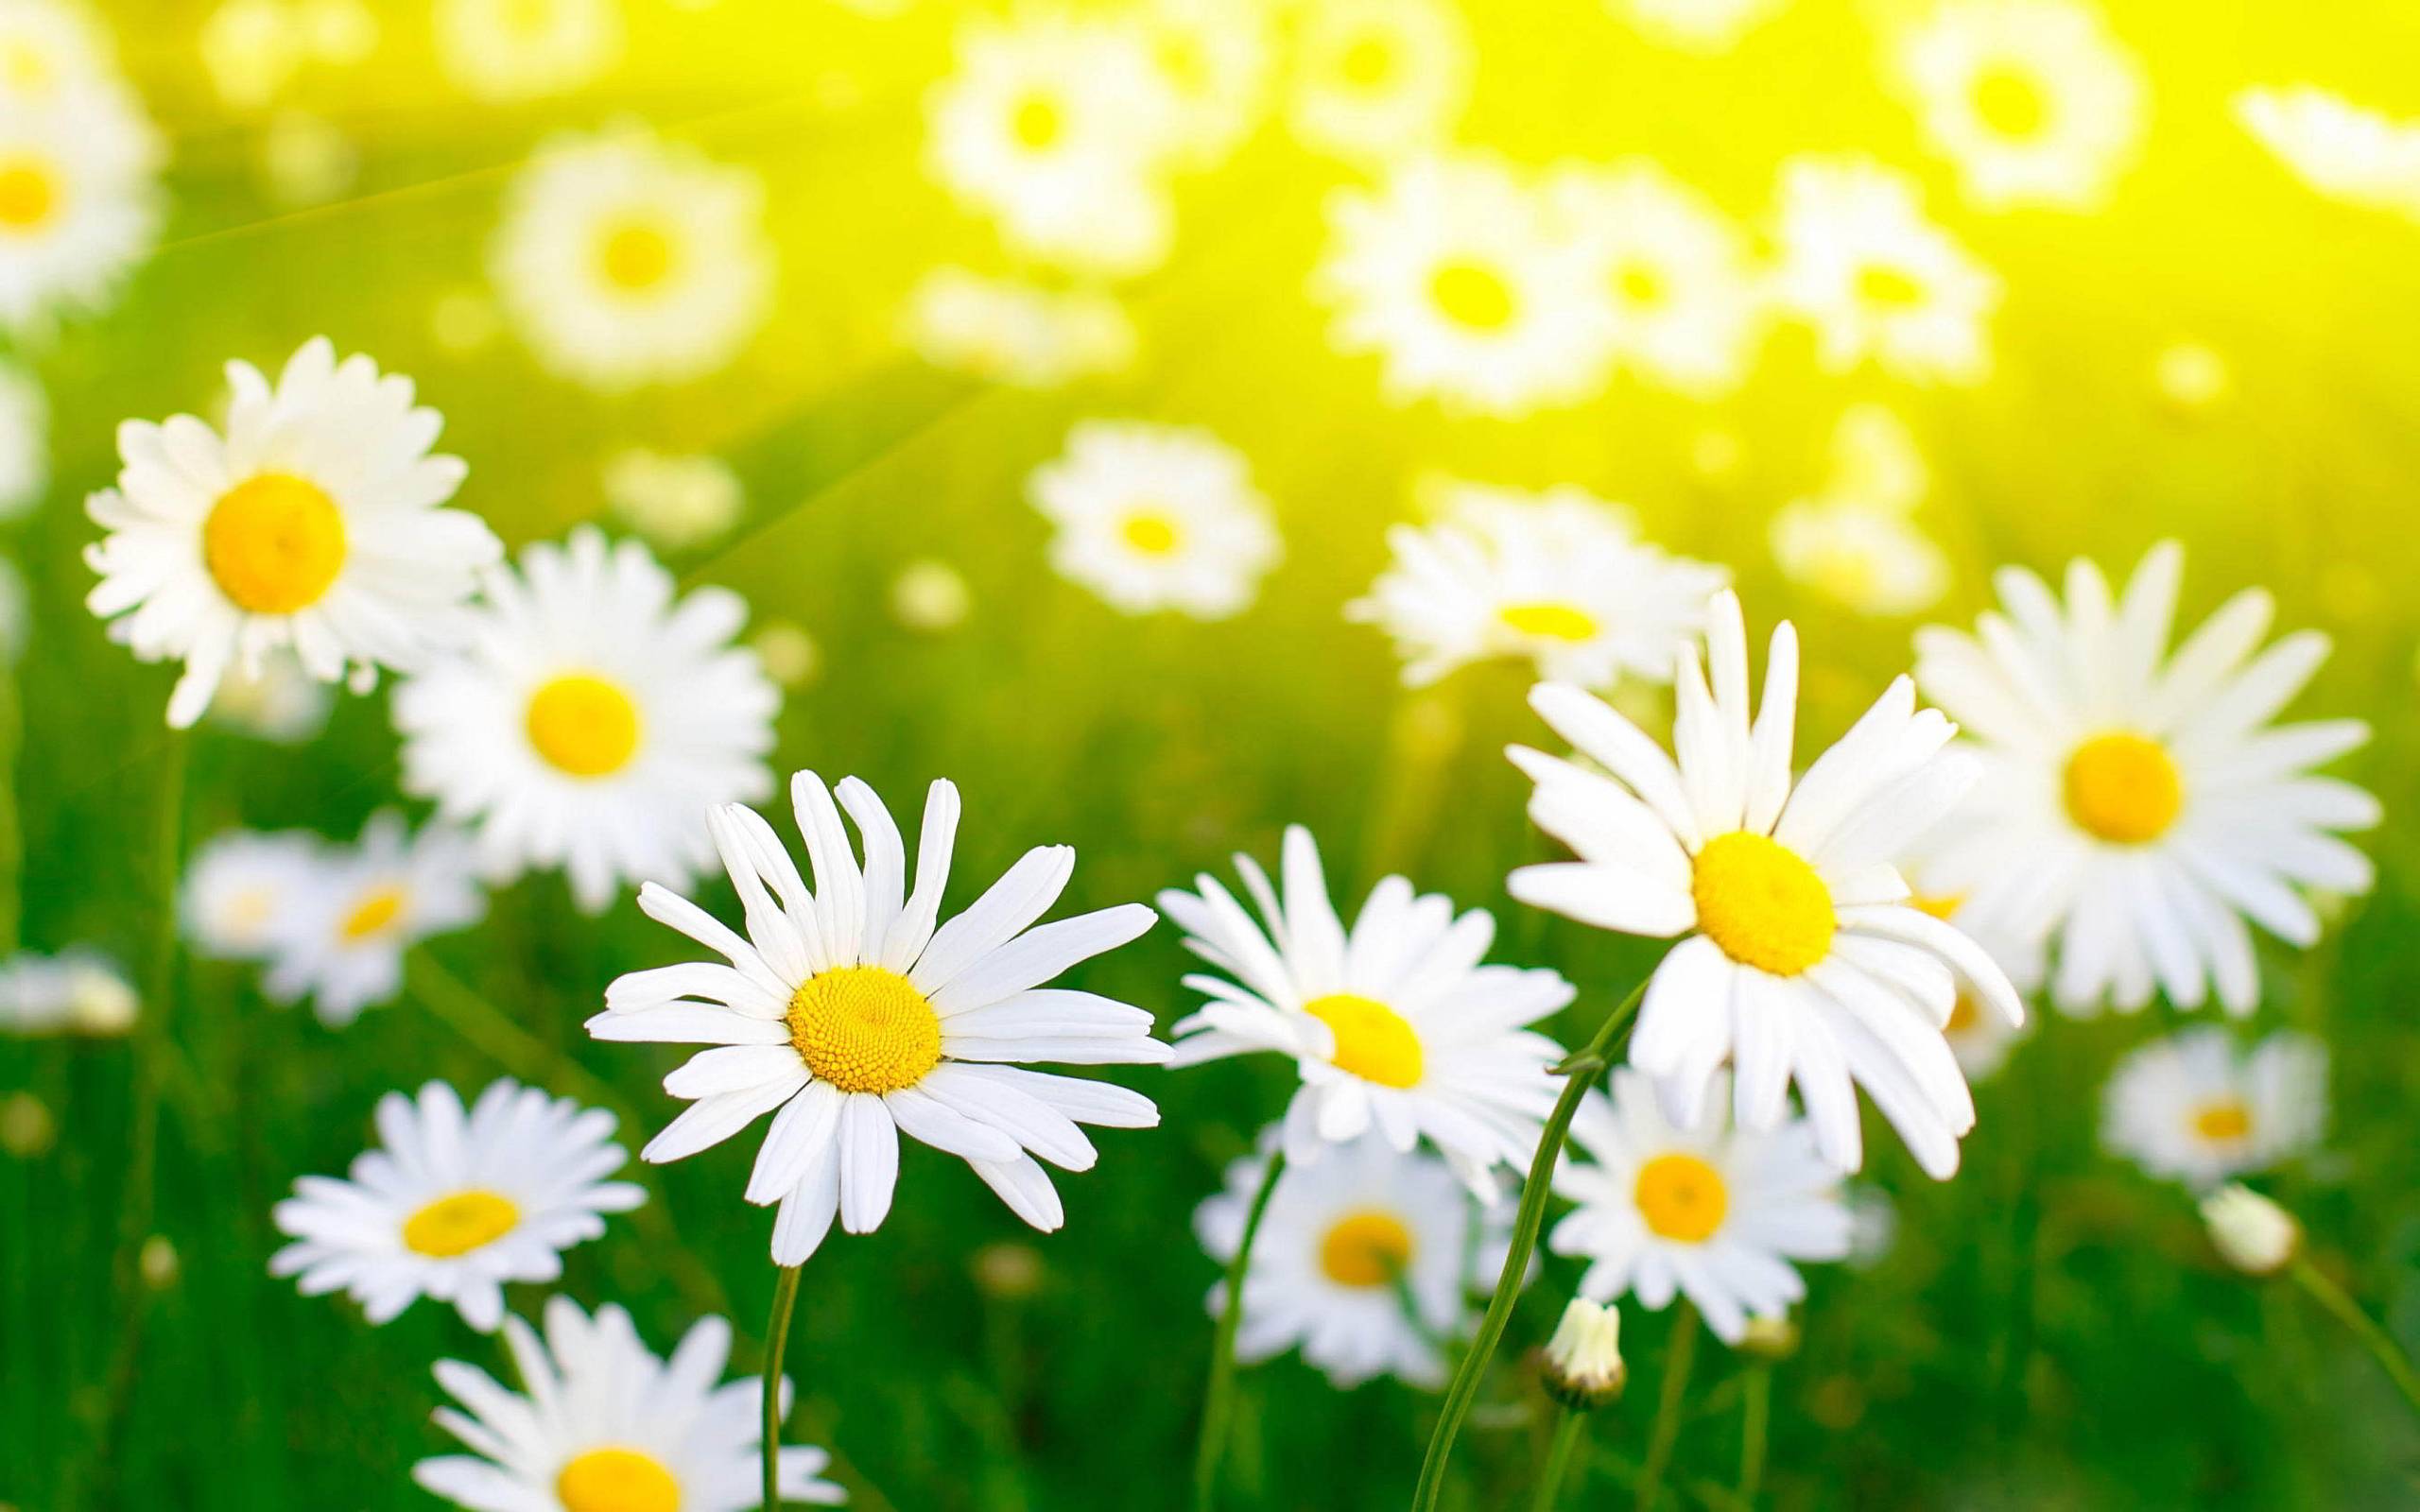 Wallpaper For > Daisies Field Background